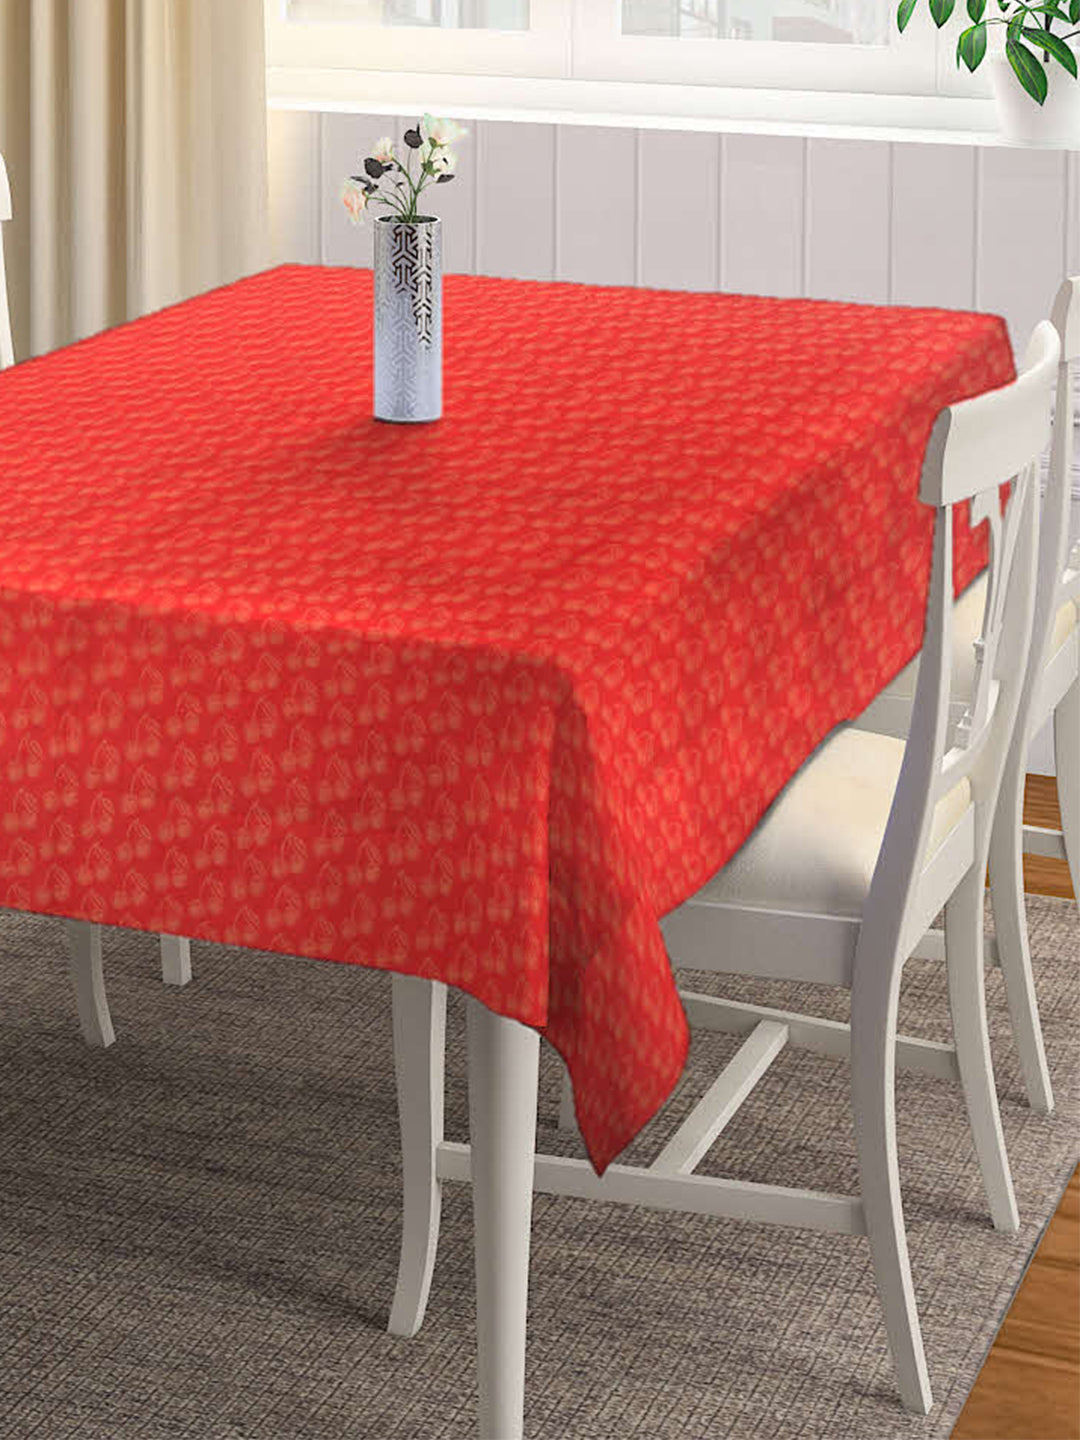 Arrabi Red Leaf 100% Handwoven Cotton 8 SEATER Table Cover (220 x 150 cm)